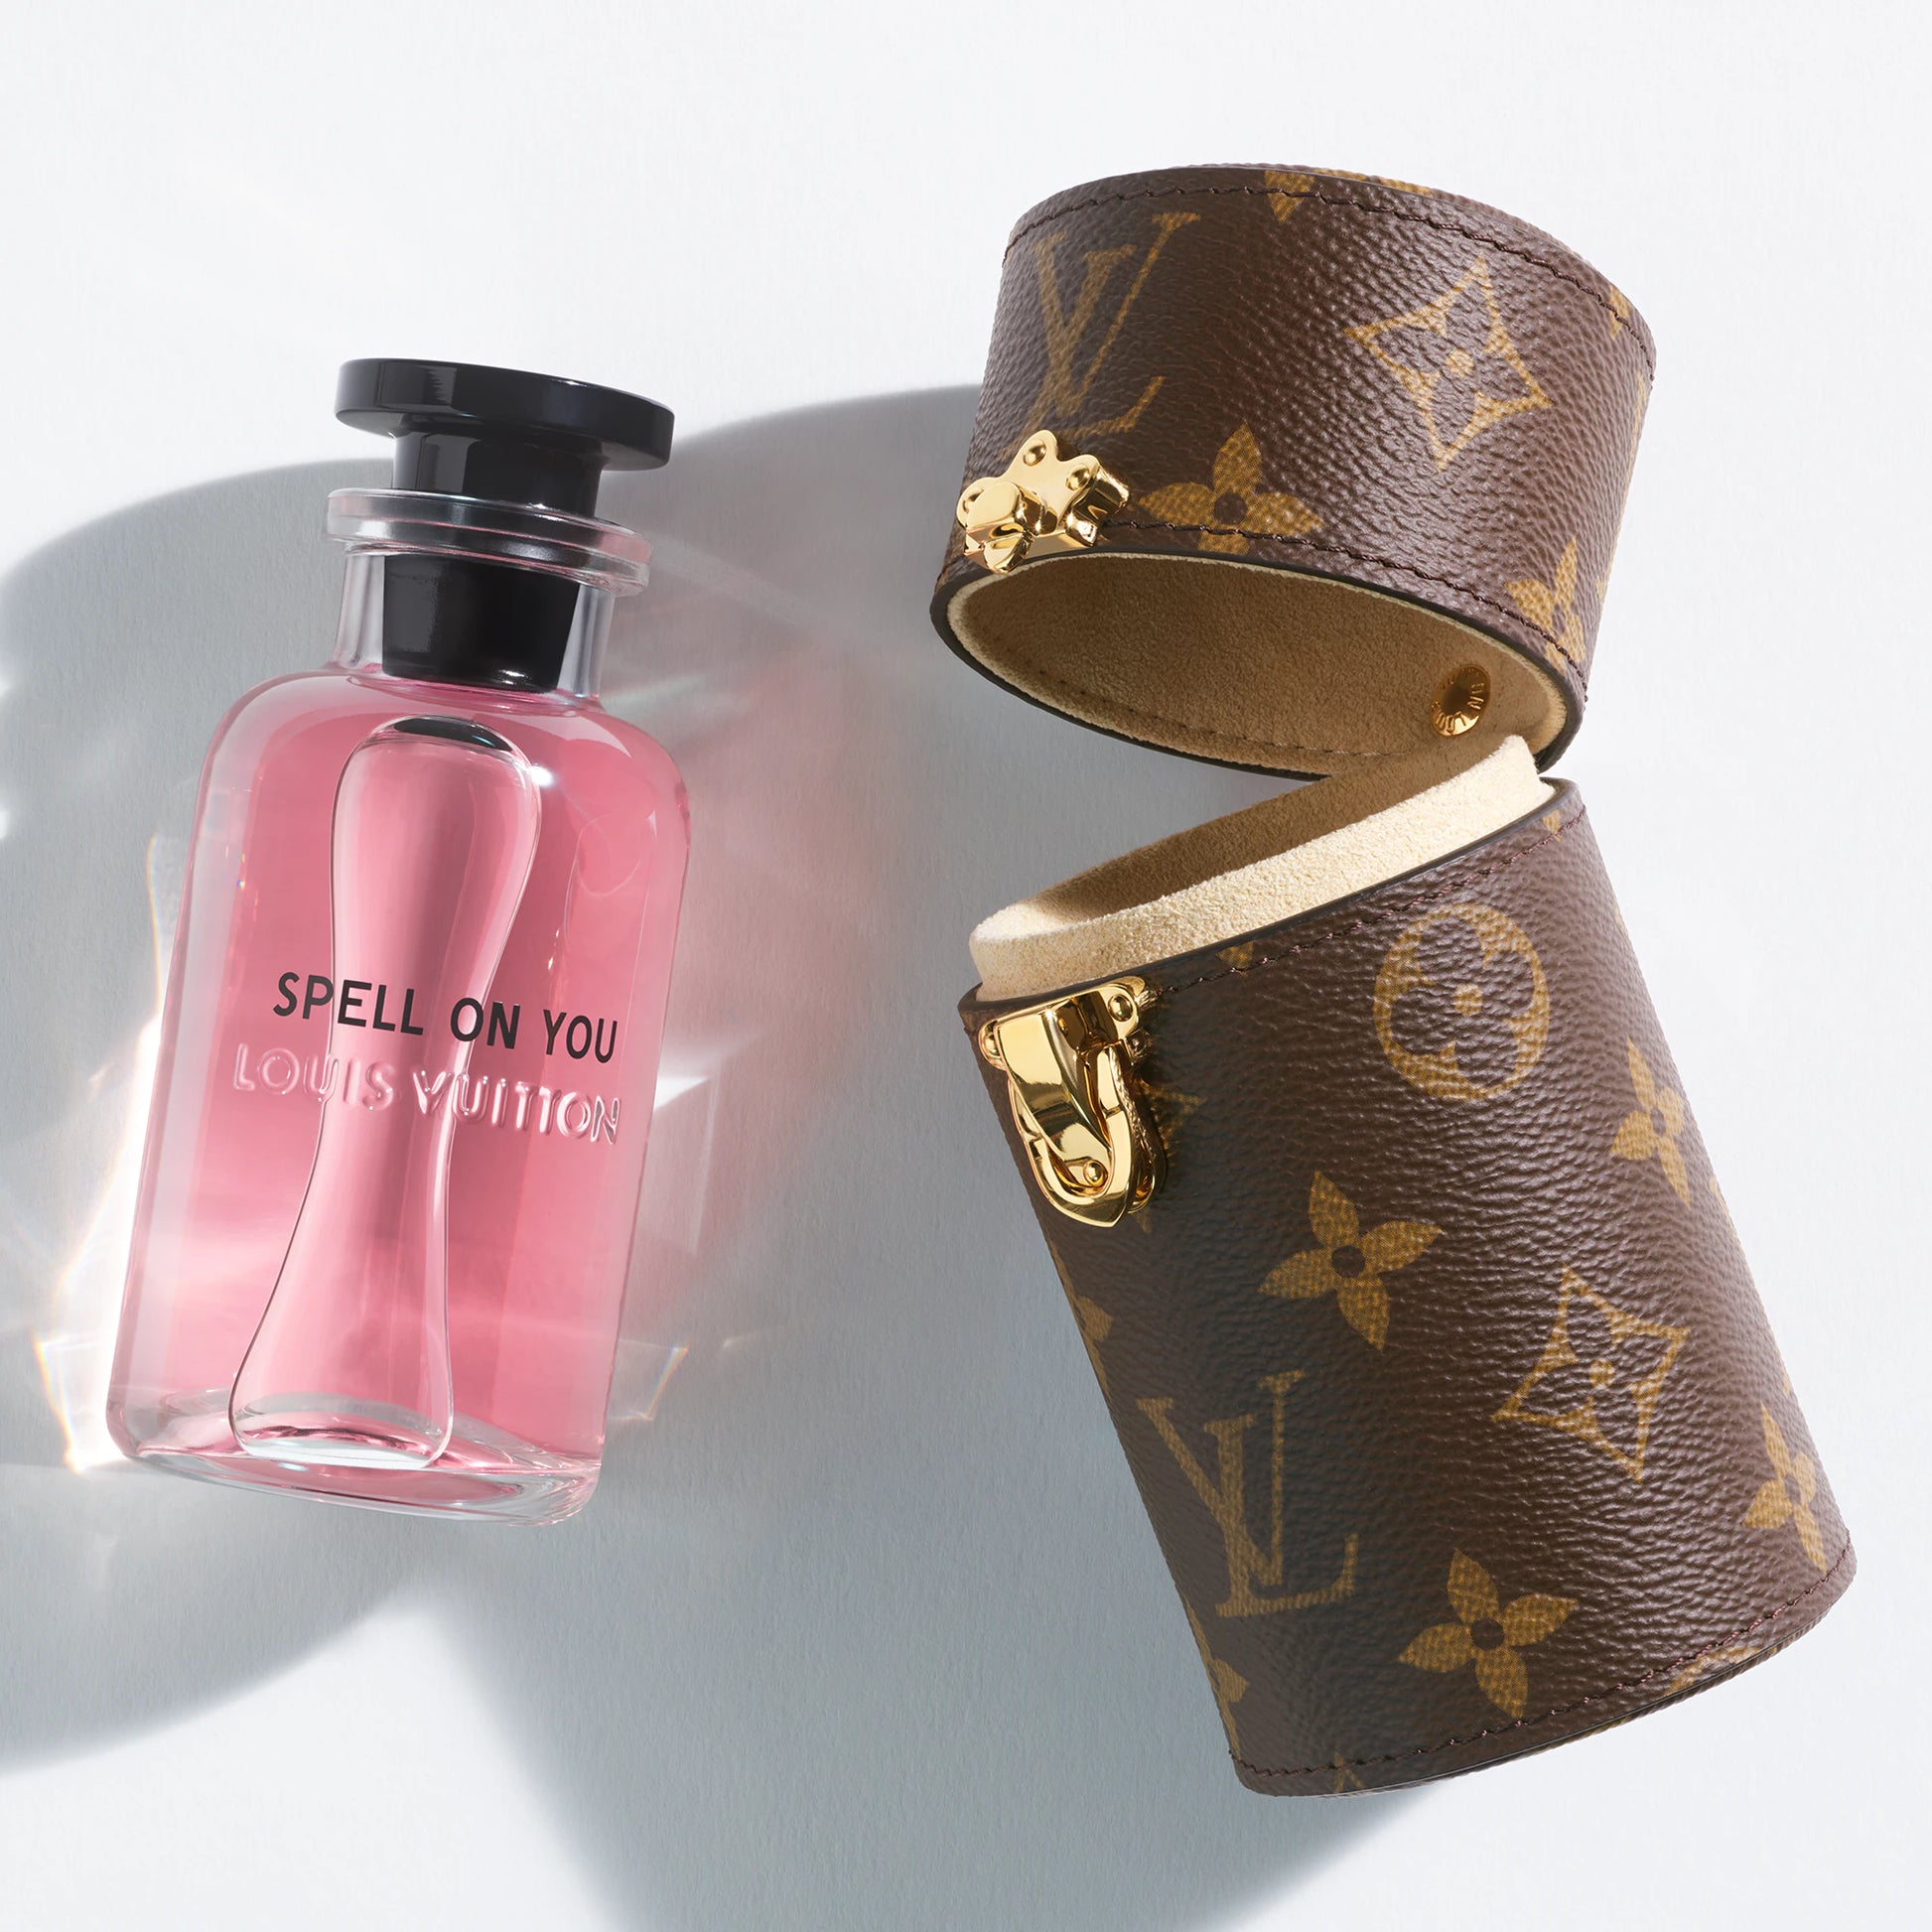 louis vuitton spell on you perfume review